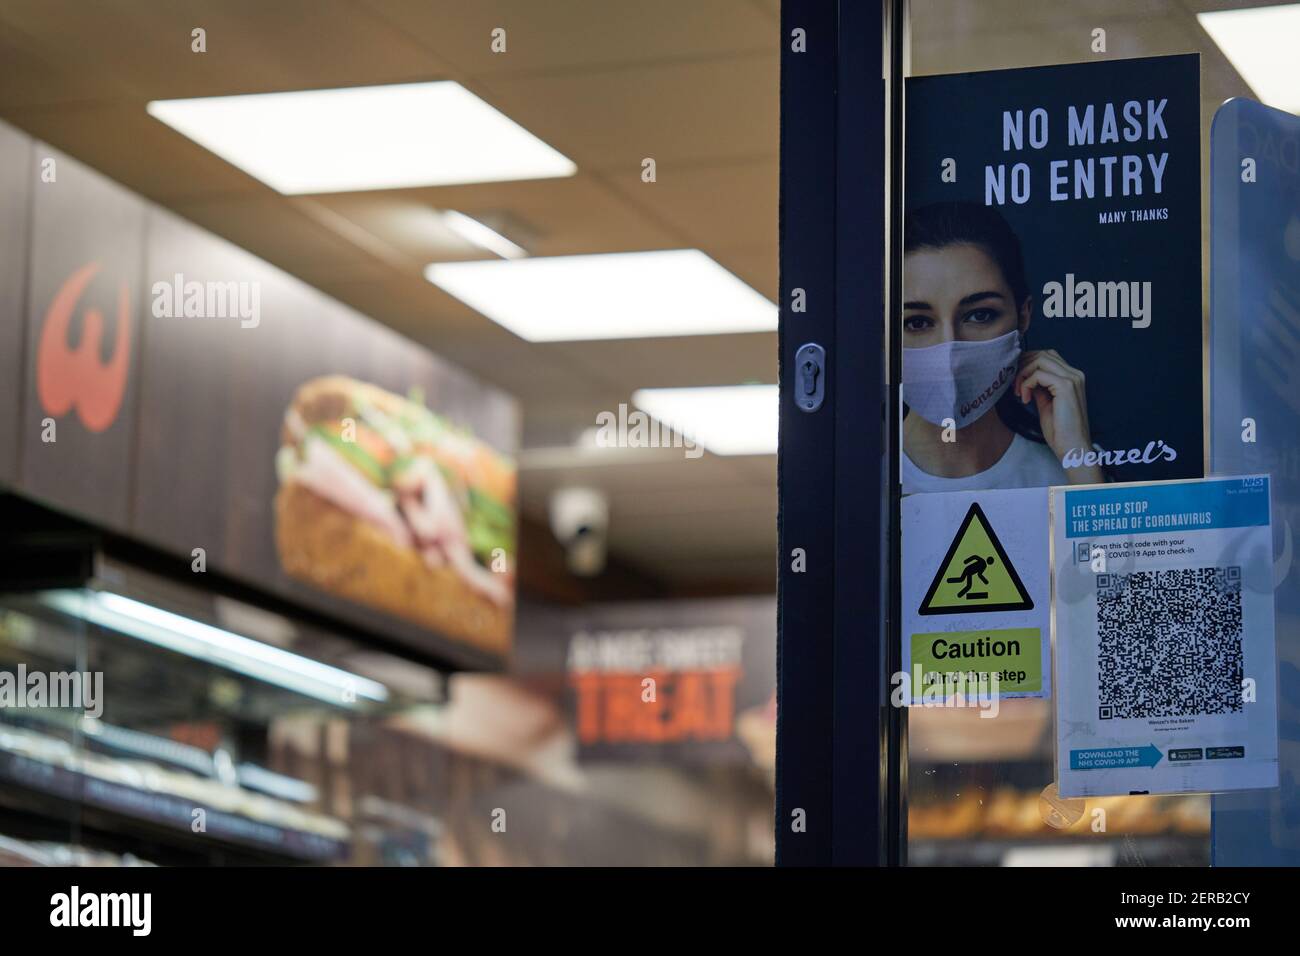 London, UK - 25 Feb 2021: A 'No Mask No Entry' sign on a London bakery shop during the coronavirus pandemic. Concerns have been raised about the impact of  such notices on those medically exempt. Stock Photo